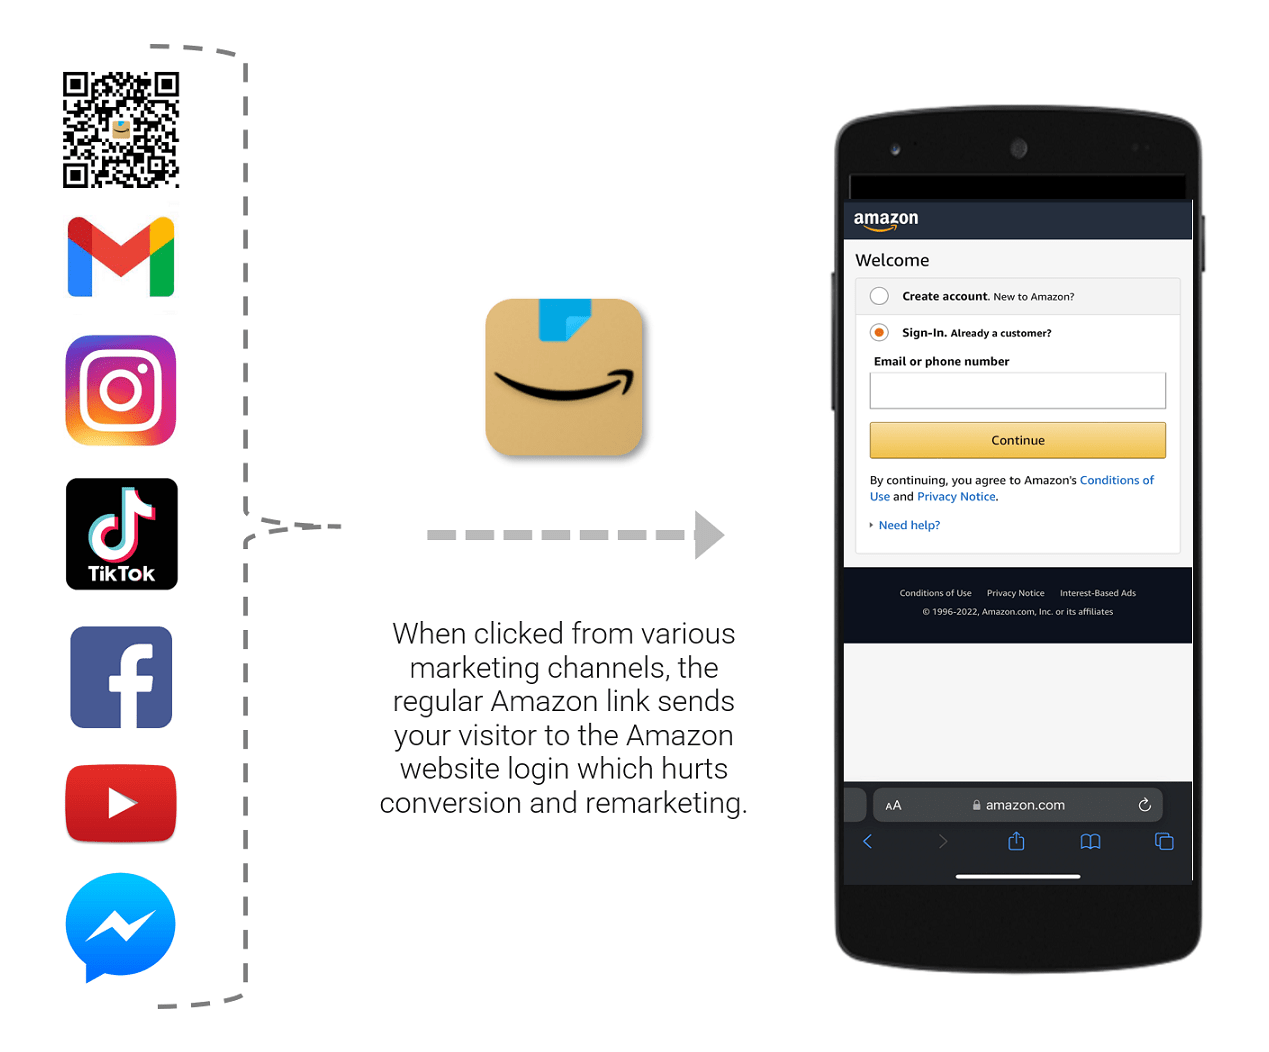 When clicked from various marketing channels, the regular Amazon link sends your visitor to the Amazon website login which hurts conversion and remarketing 